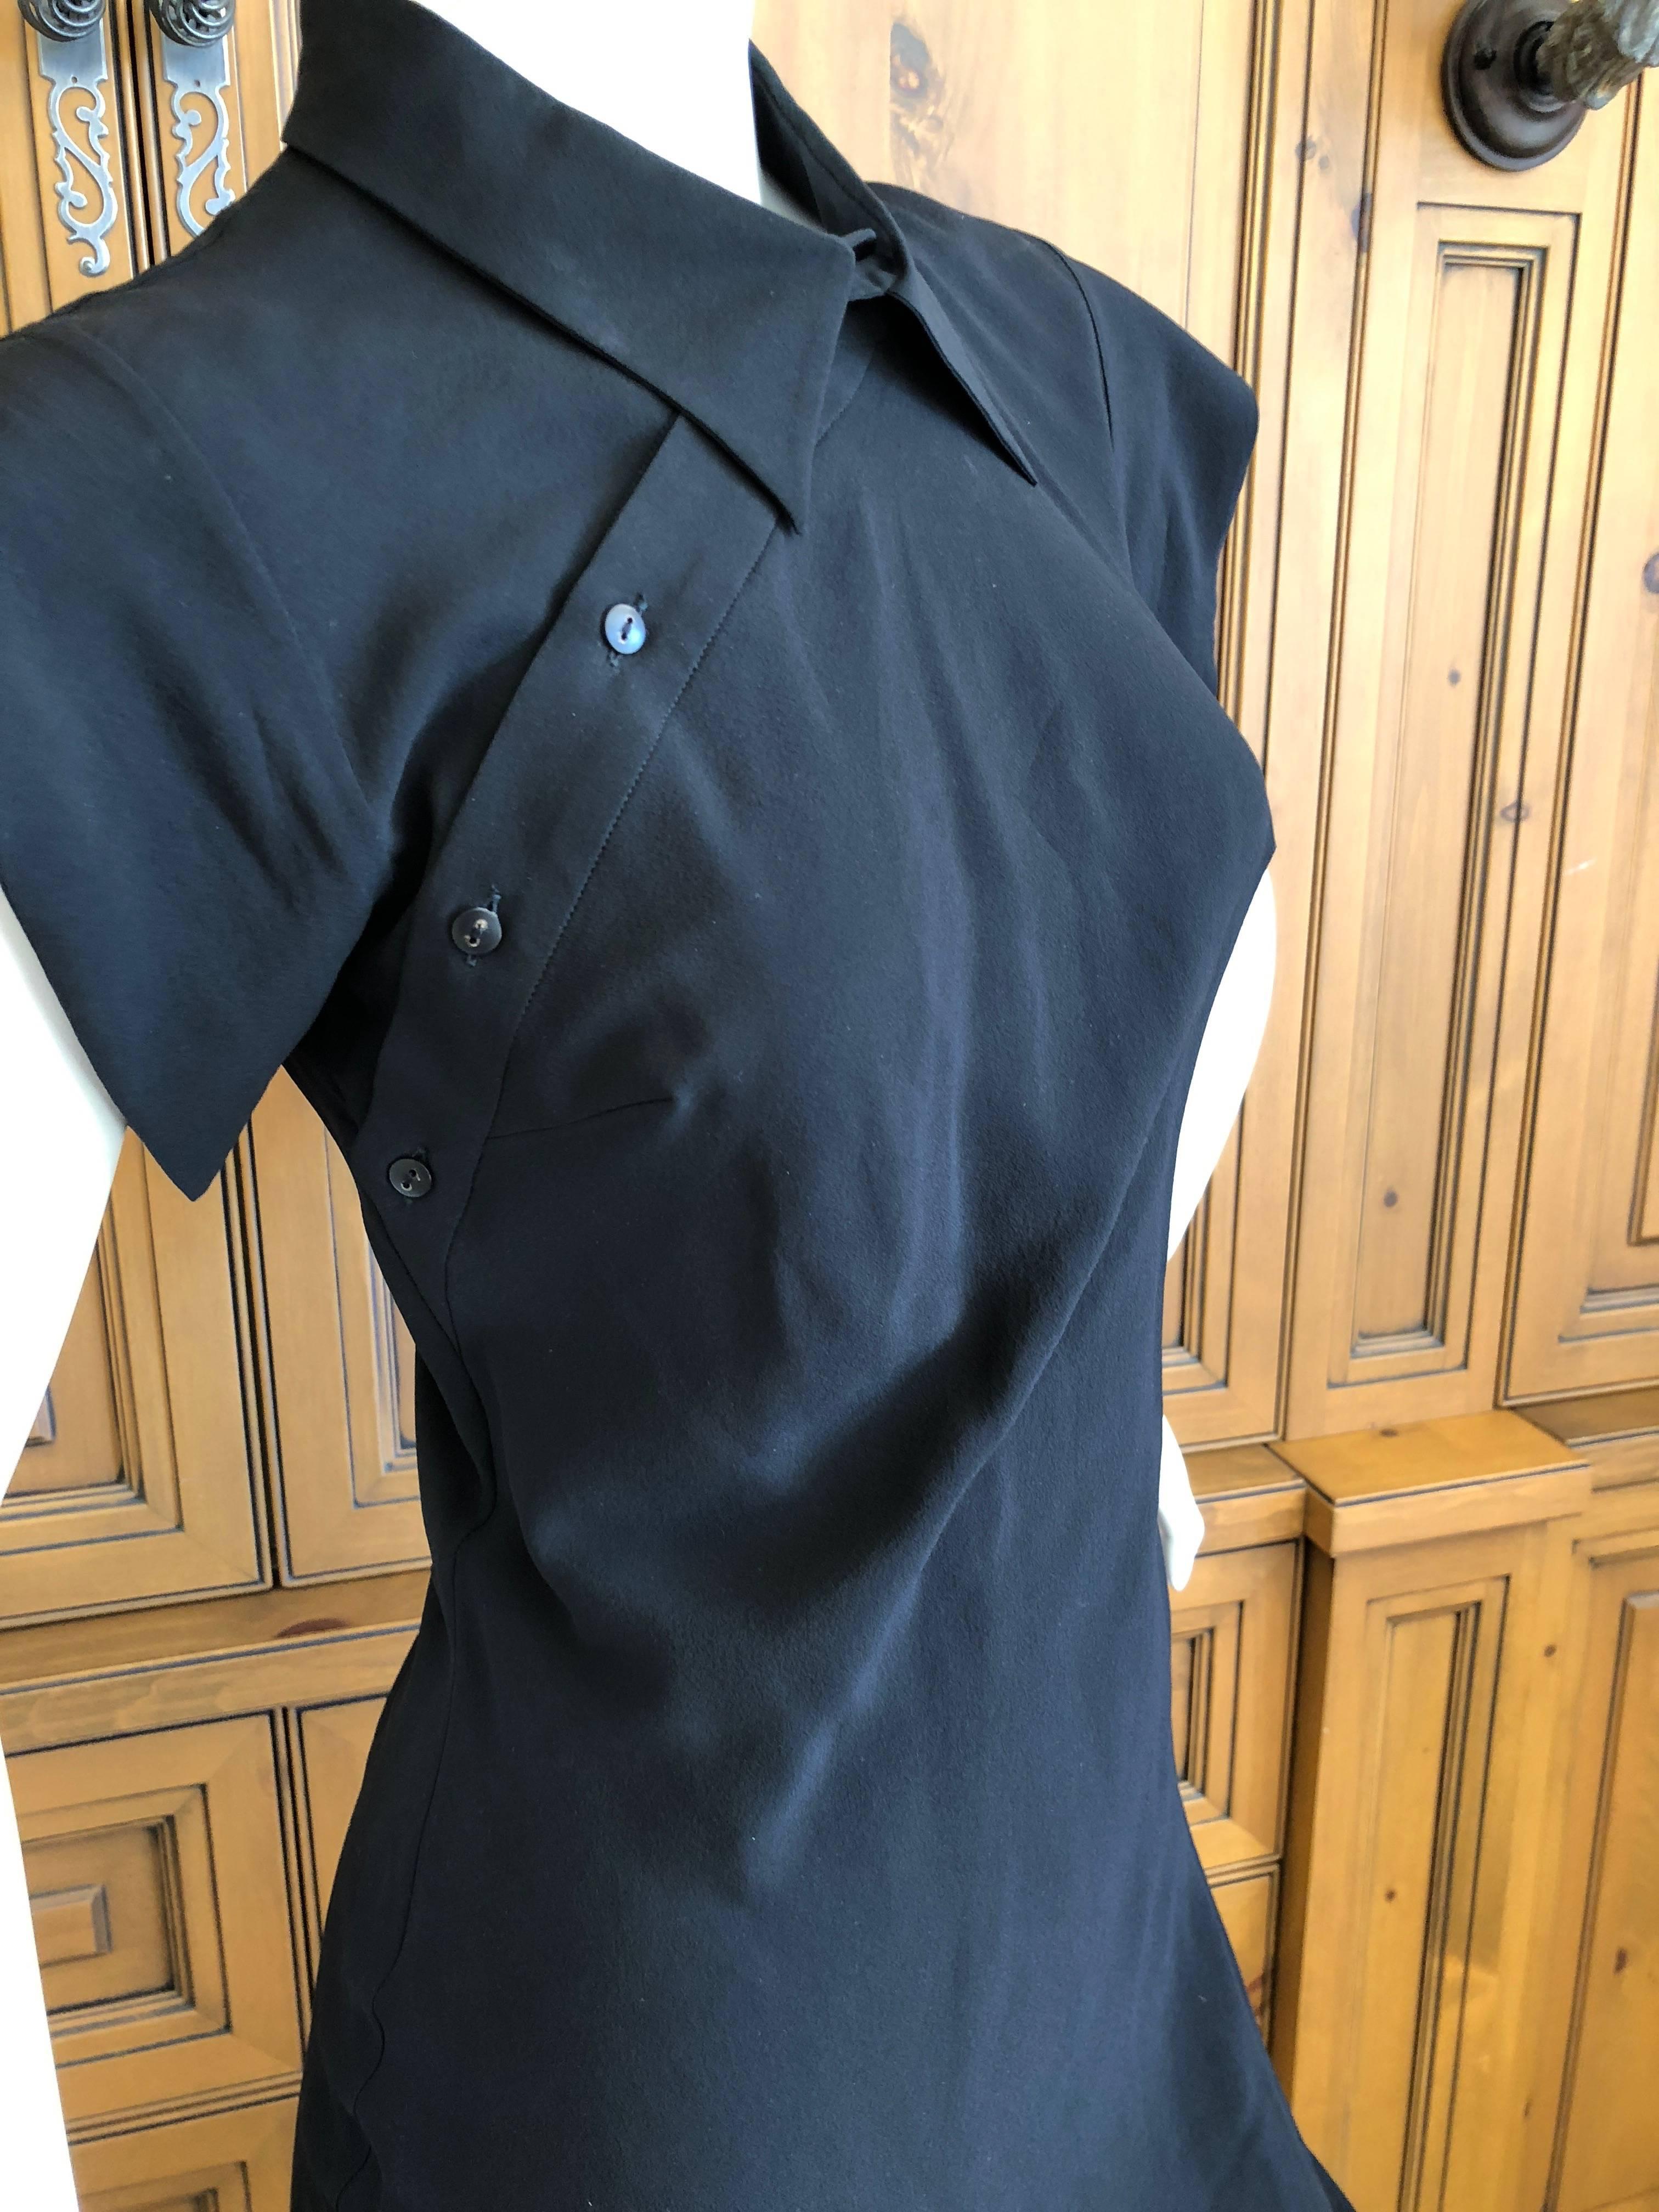 John Galliano Vintage 90's Label Black Silk Cheongsam Style Evening Dress  In Excellent Condition For Sale In Cloverdale, CA